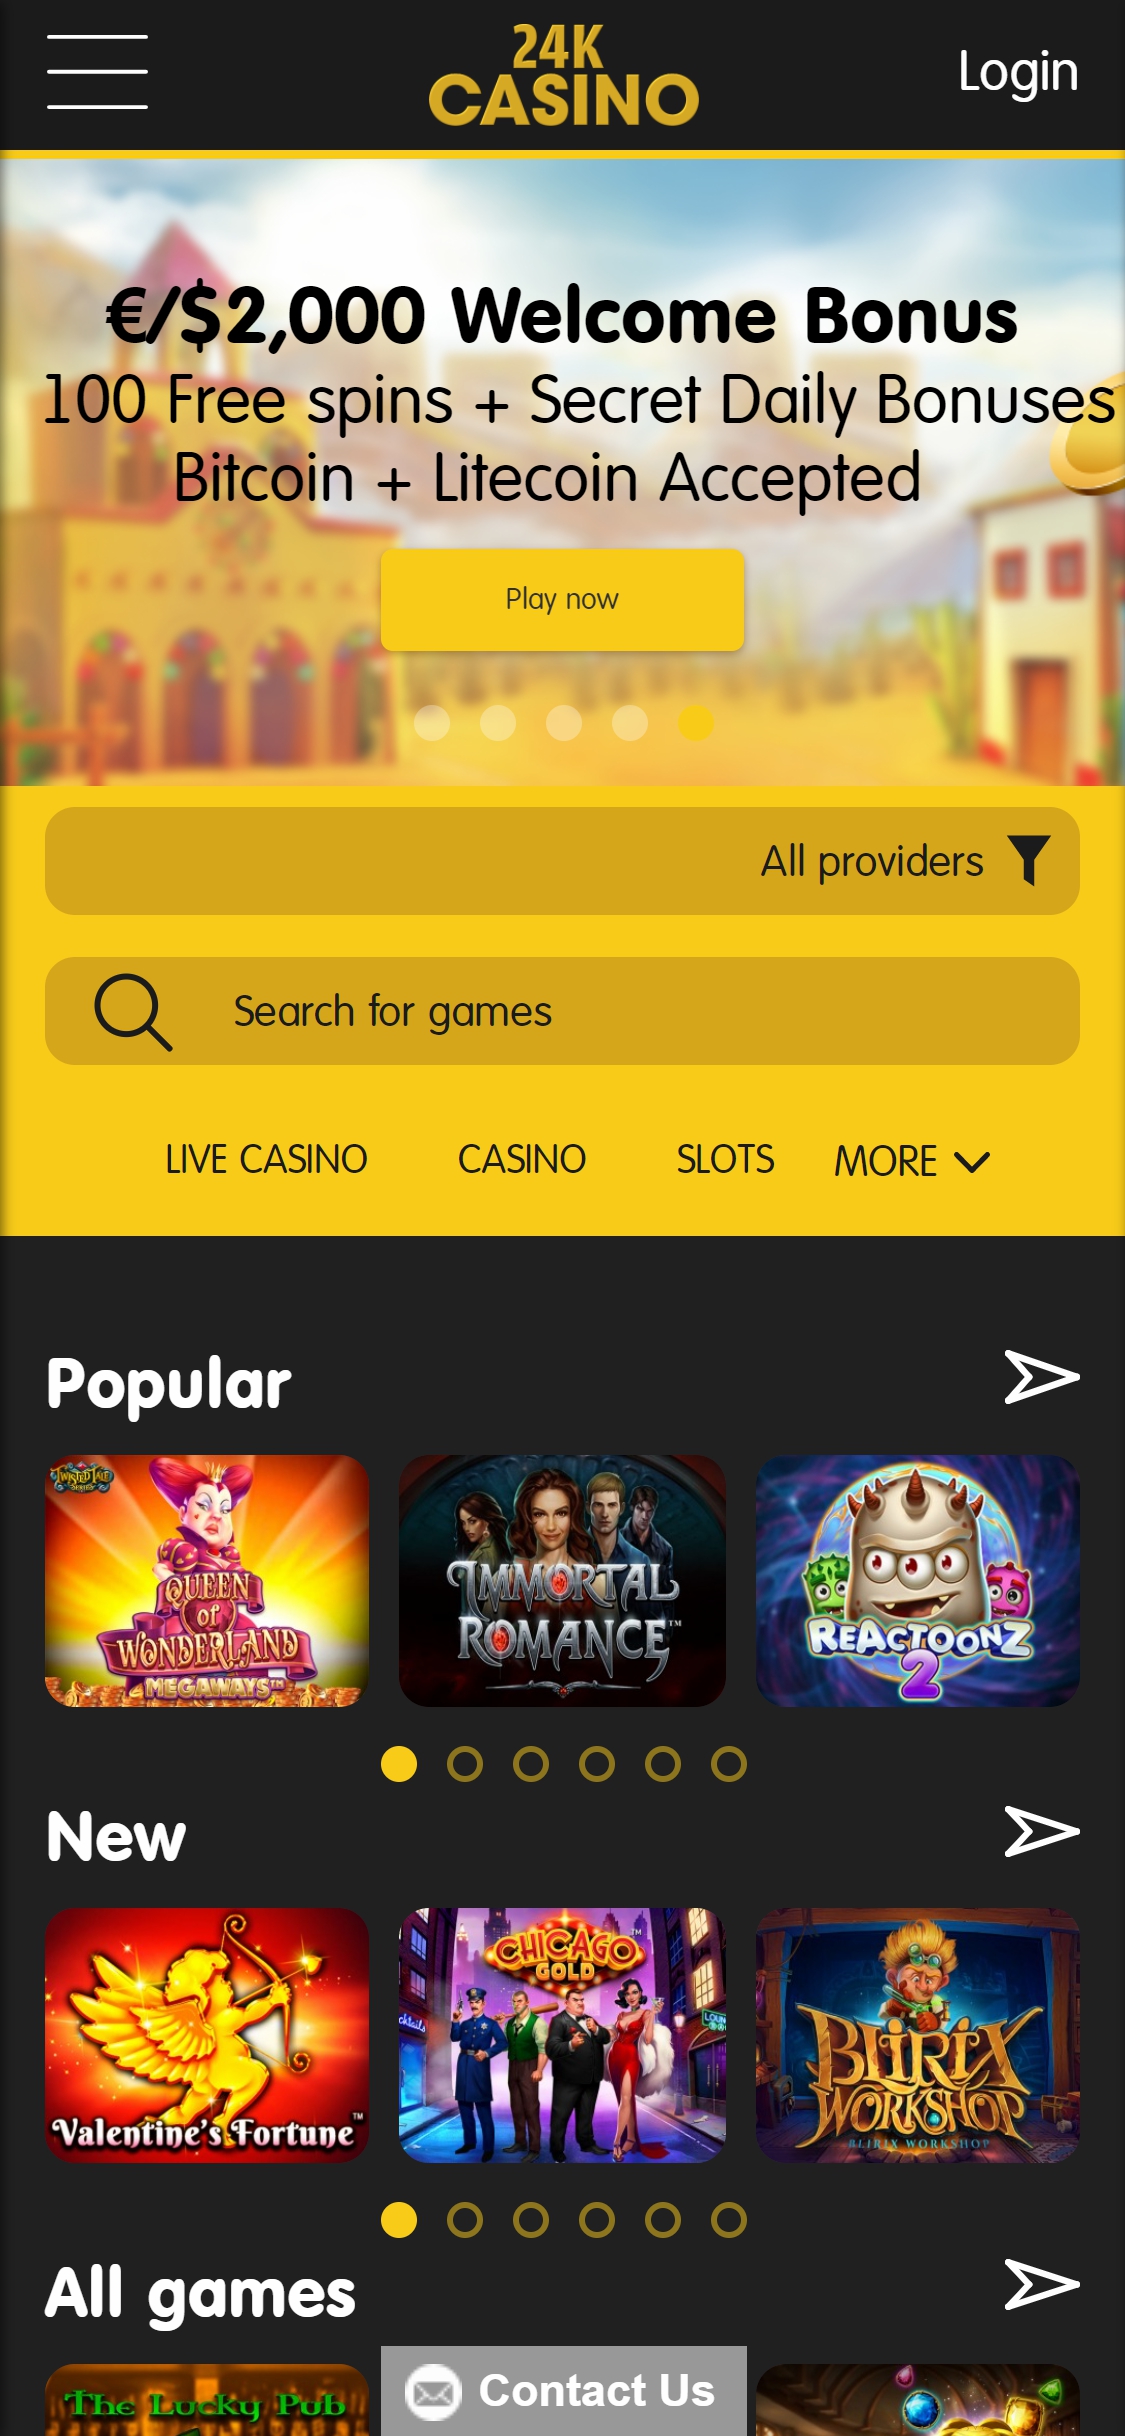 24KCasino Mobile Review